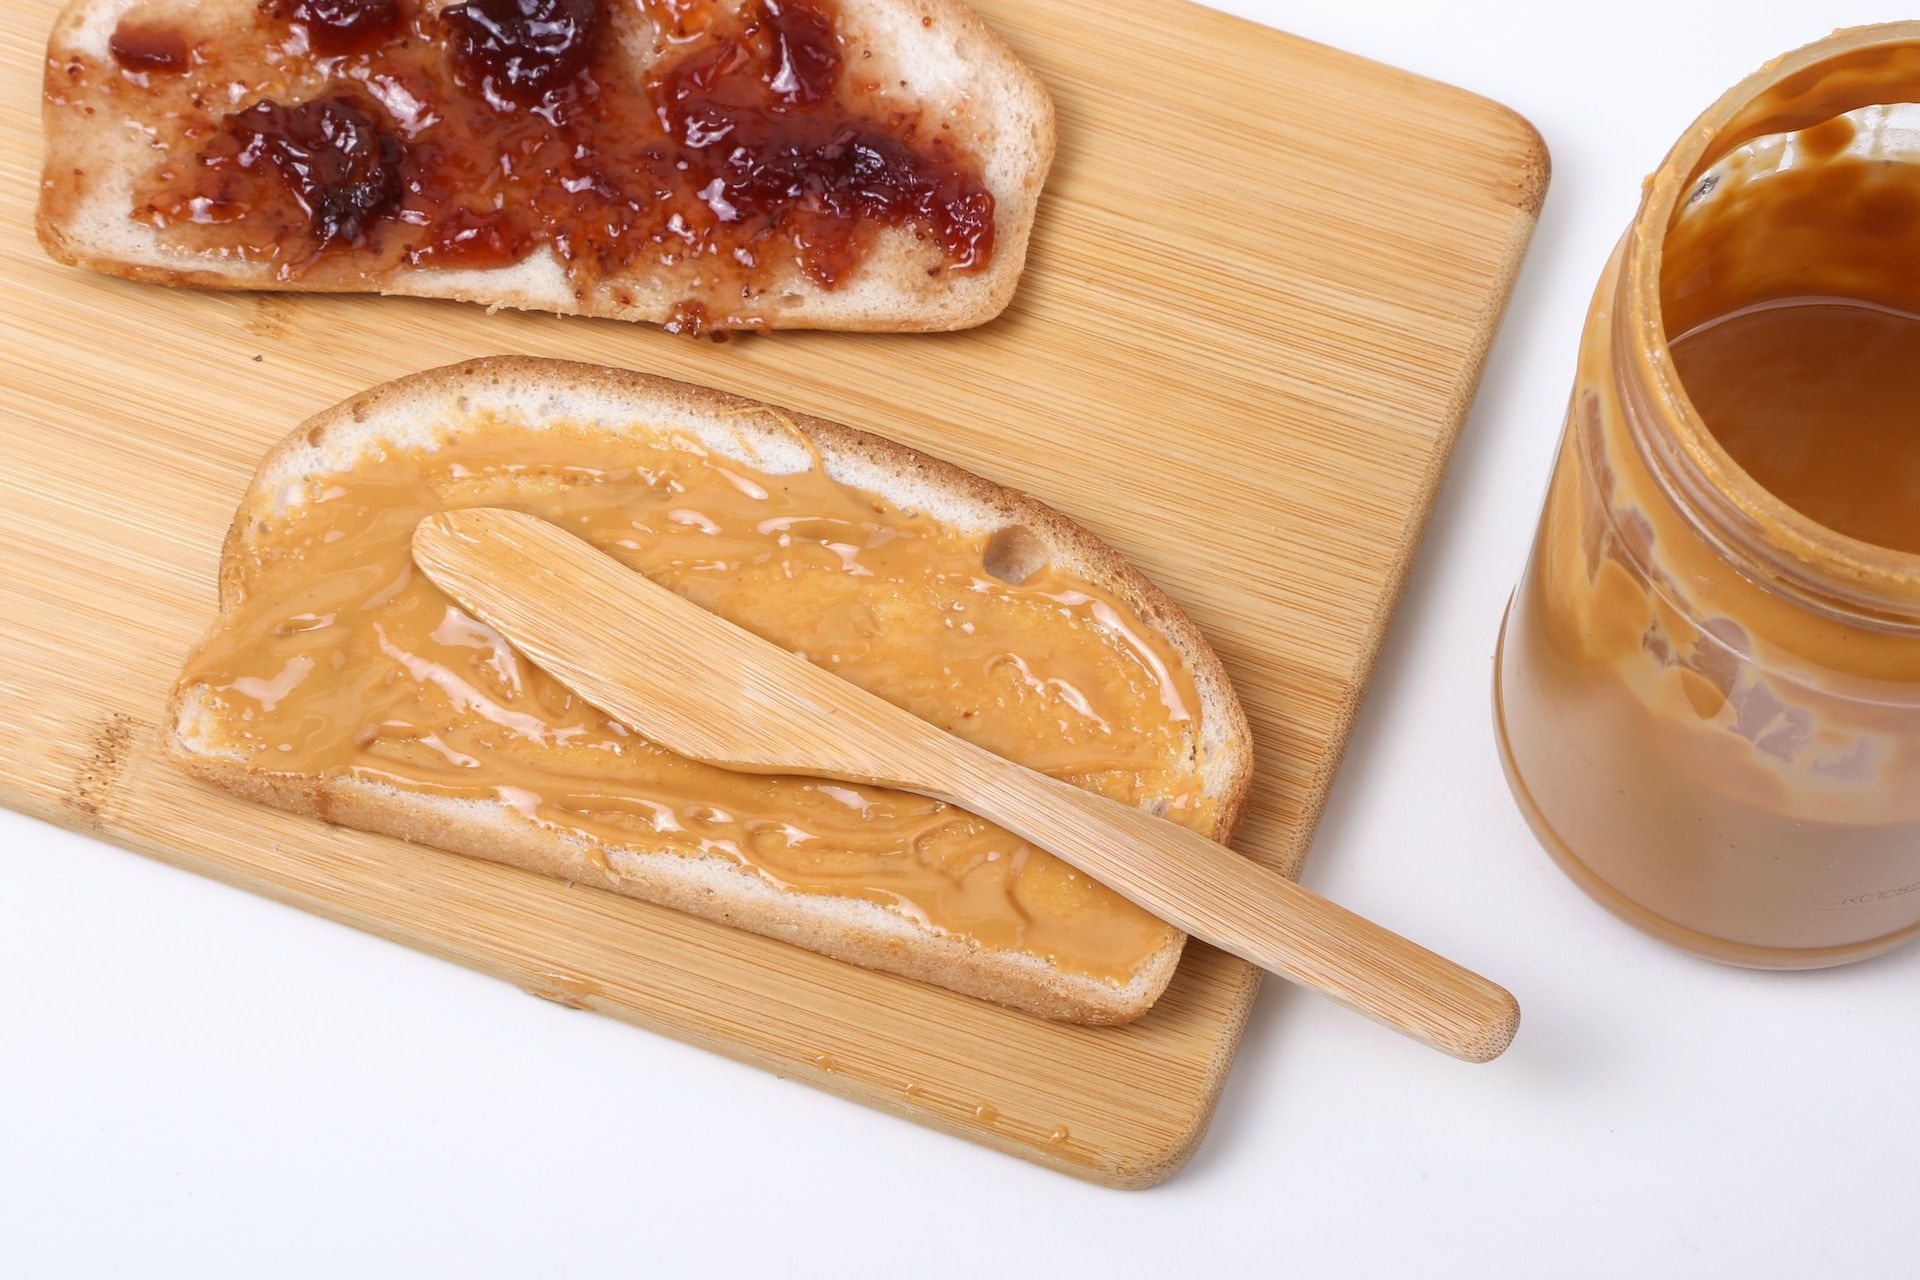 Peanut butter and jelly toast on a cutting board